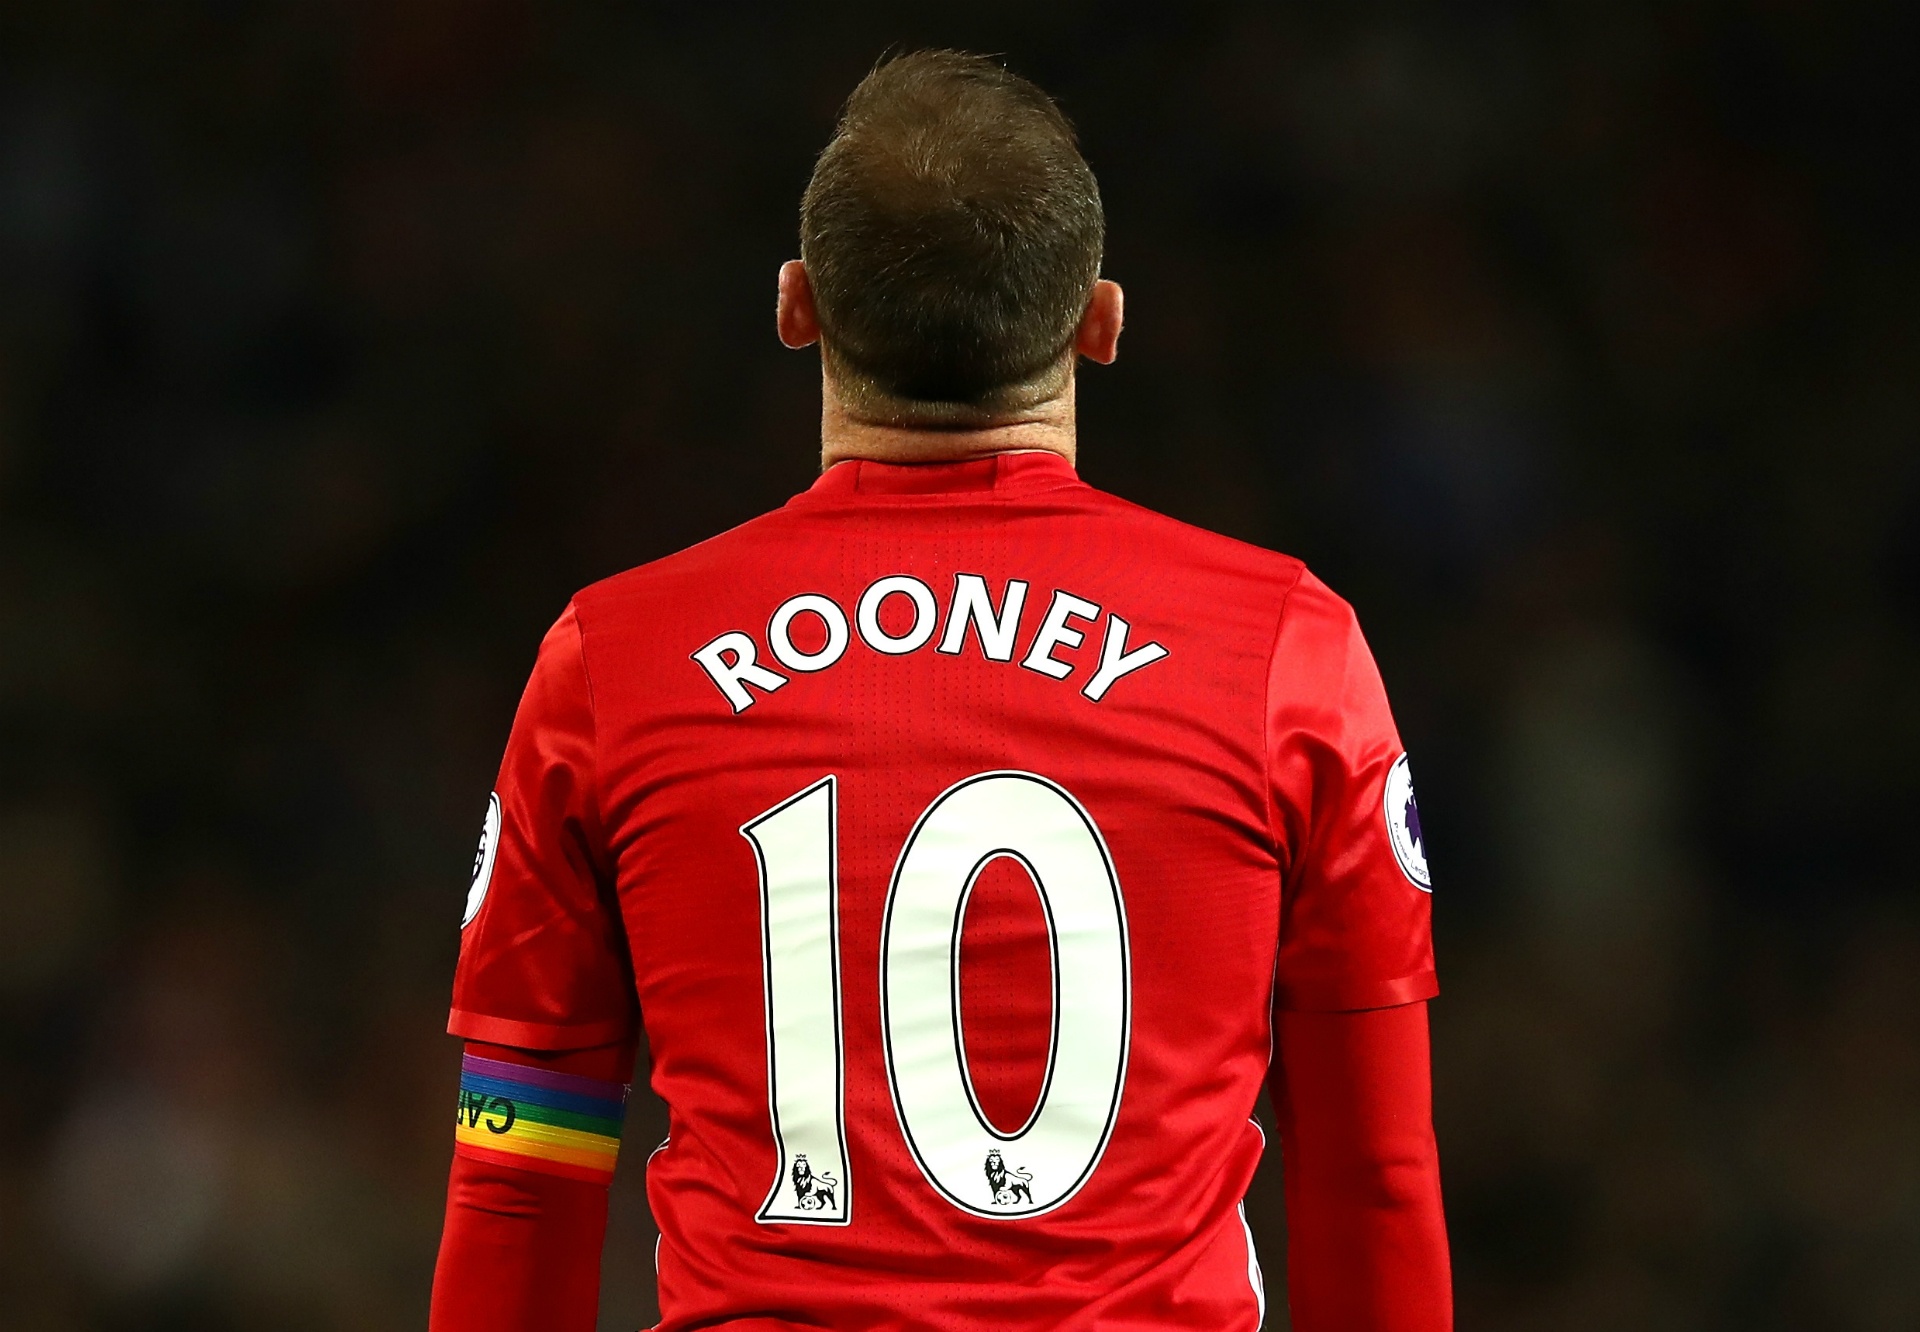 rooney manchester united jersey